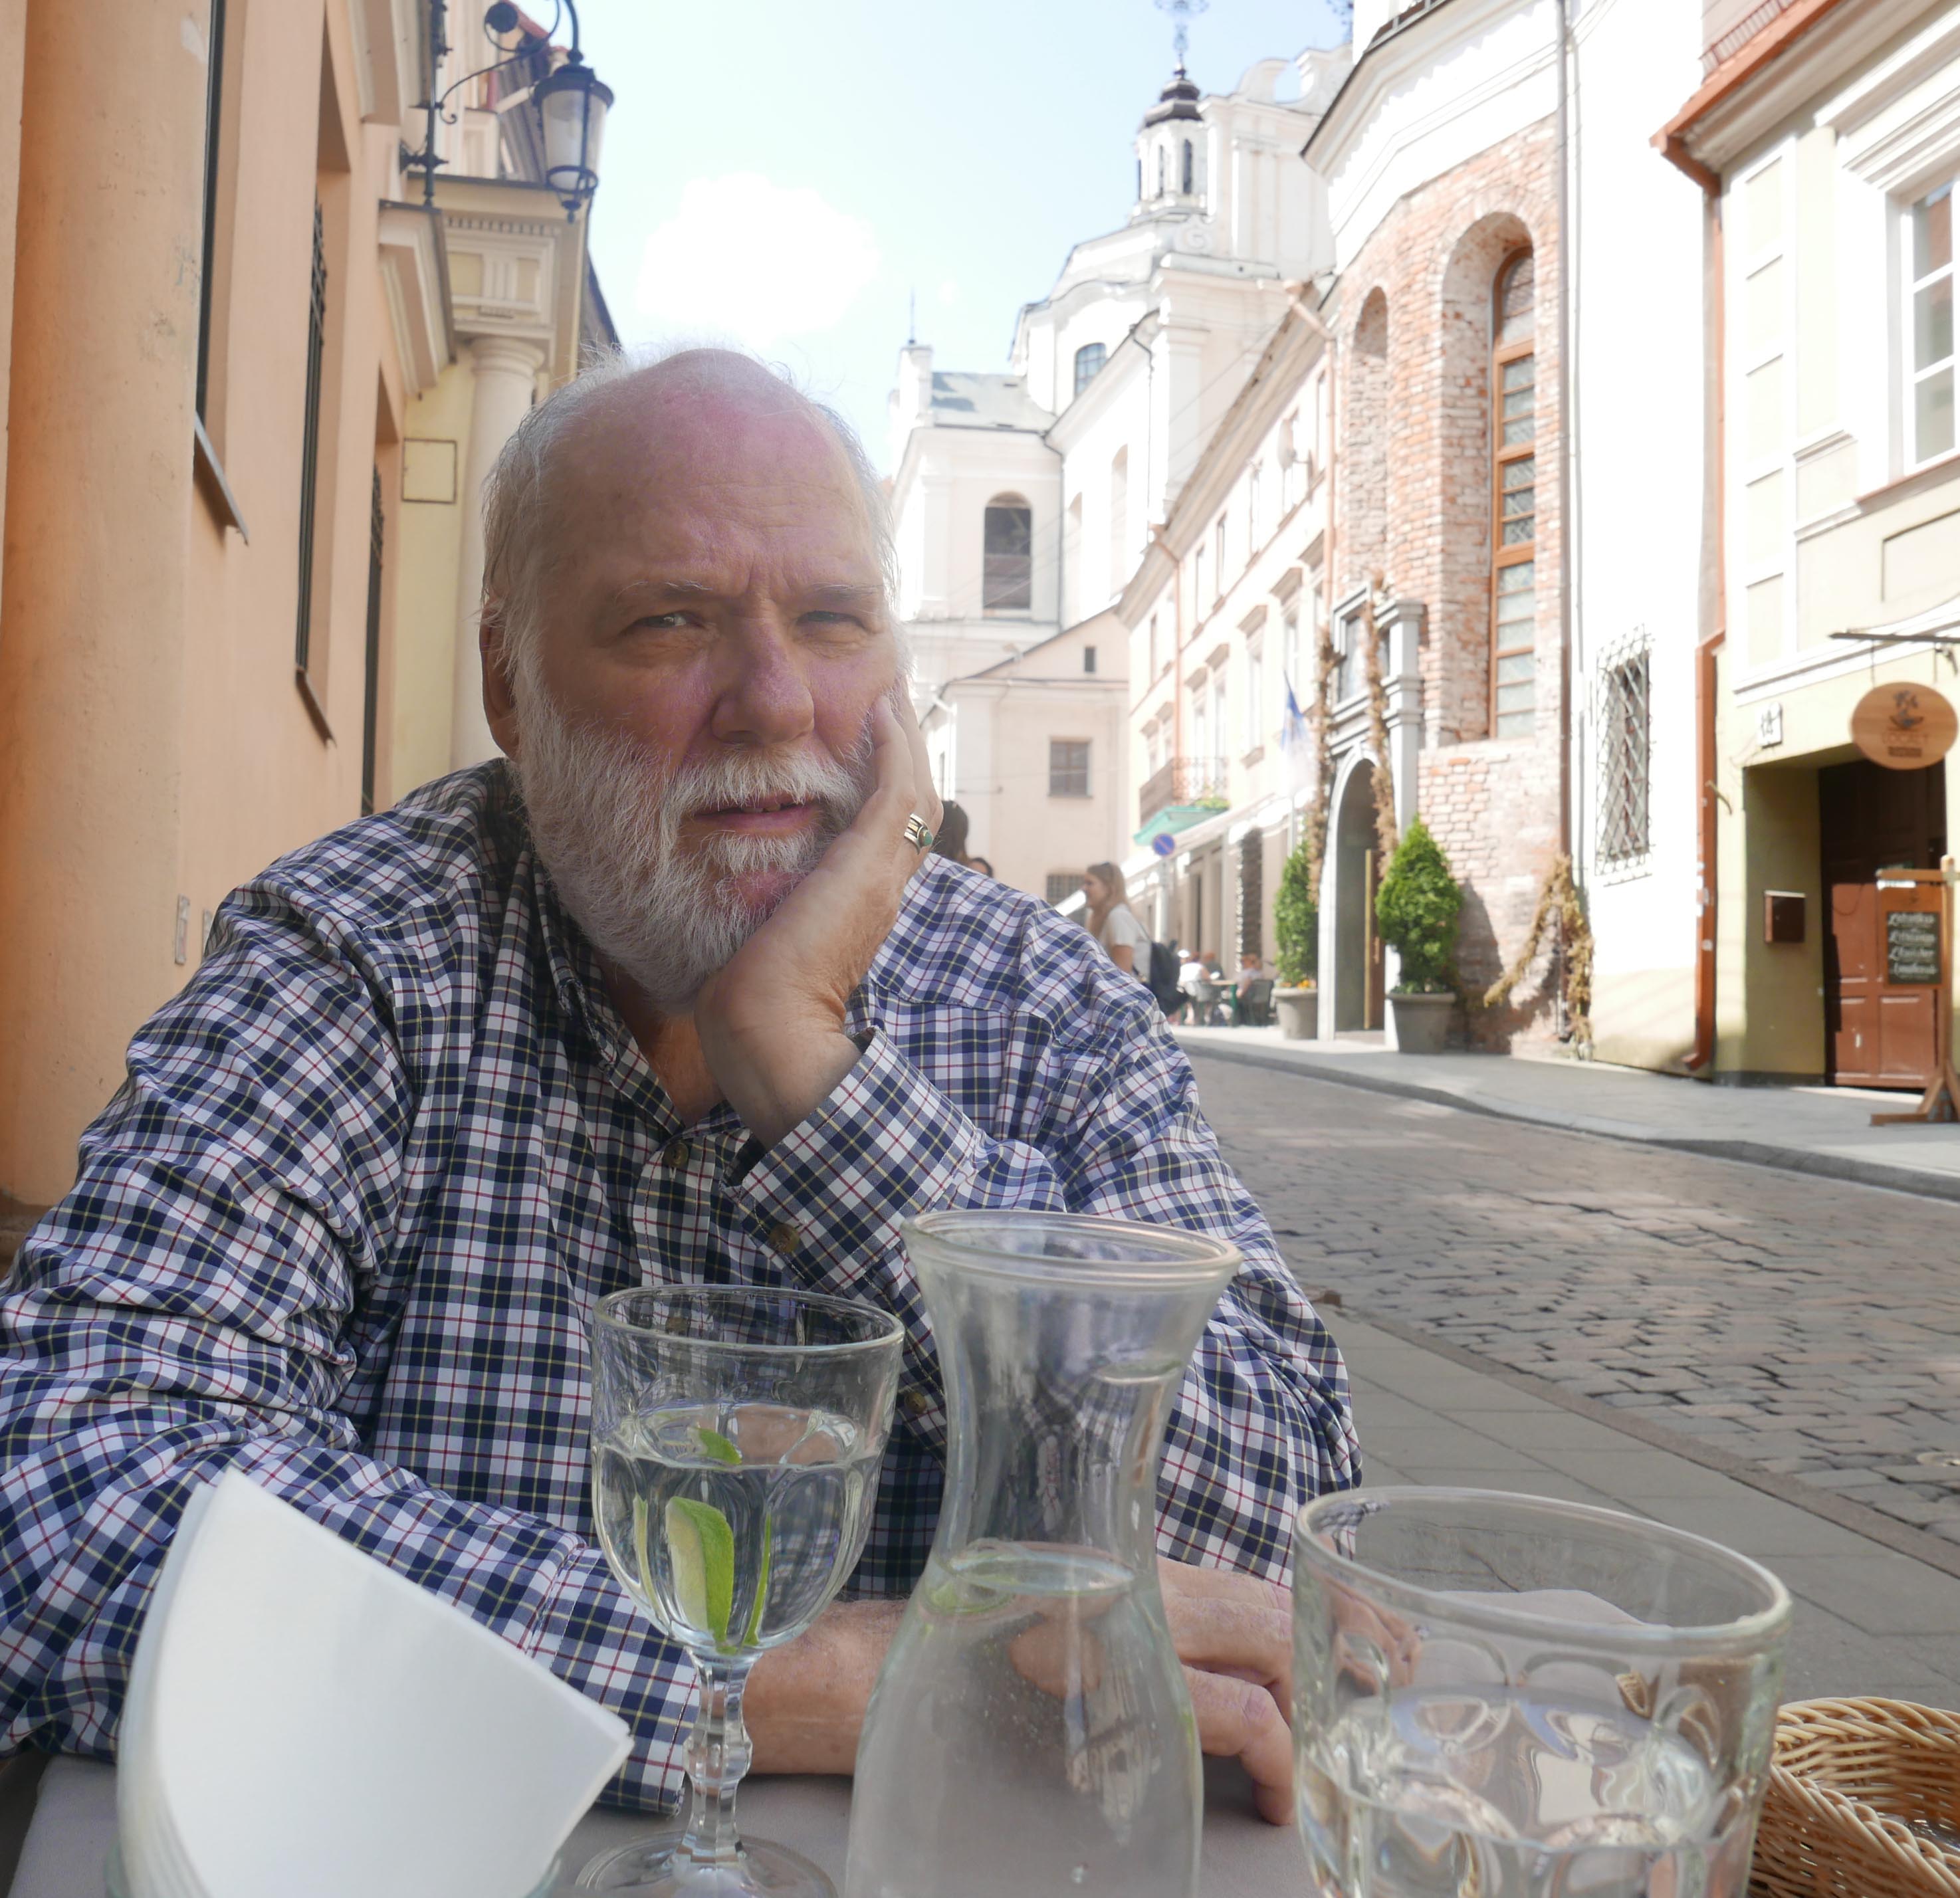 briggs sitting at table with lithuanian archtecture behind him